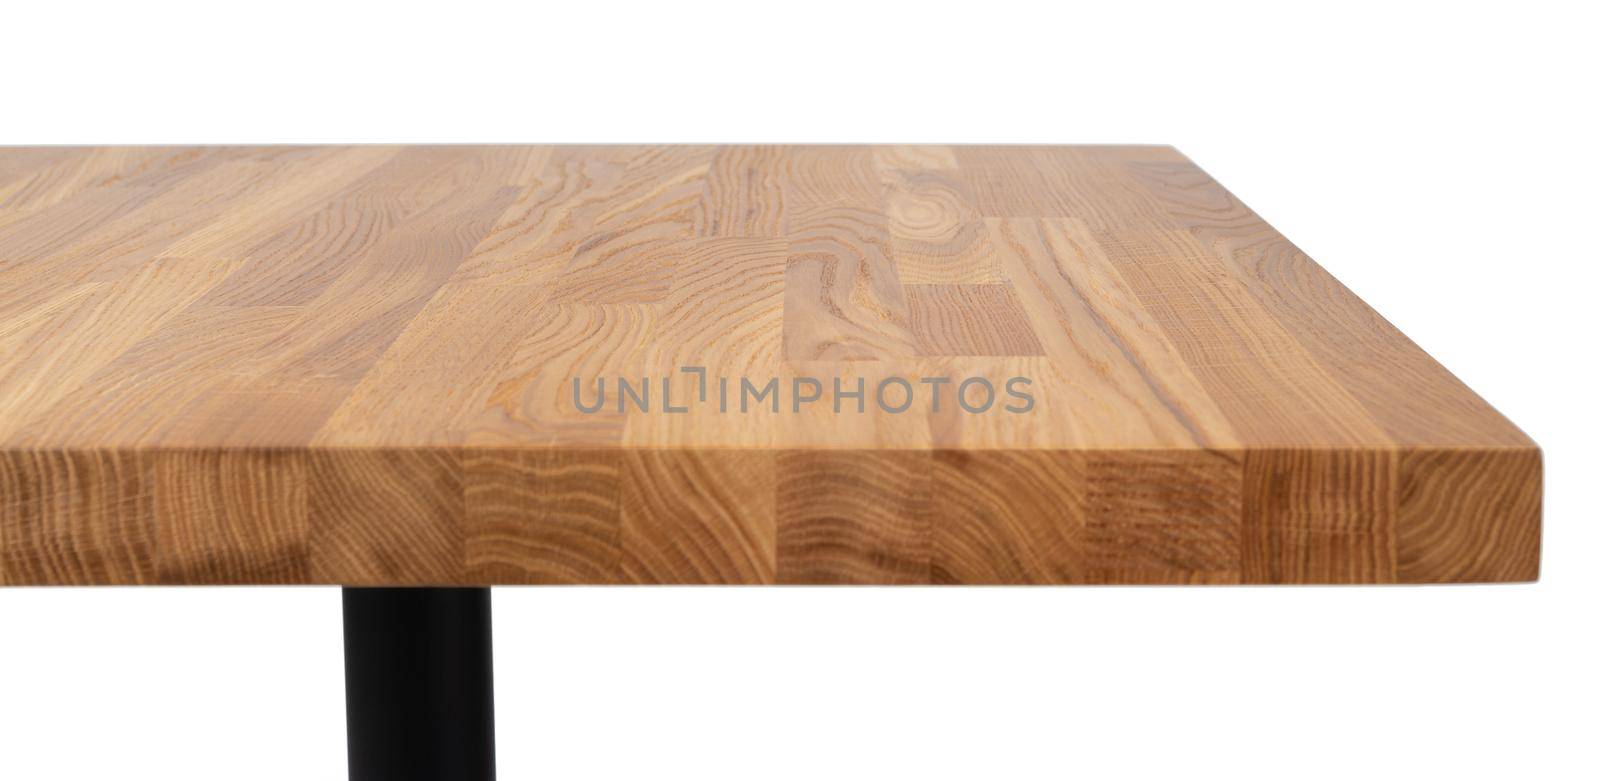 Wooden table with rectangle tabletop on white background by Fabrikasimf